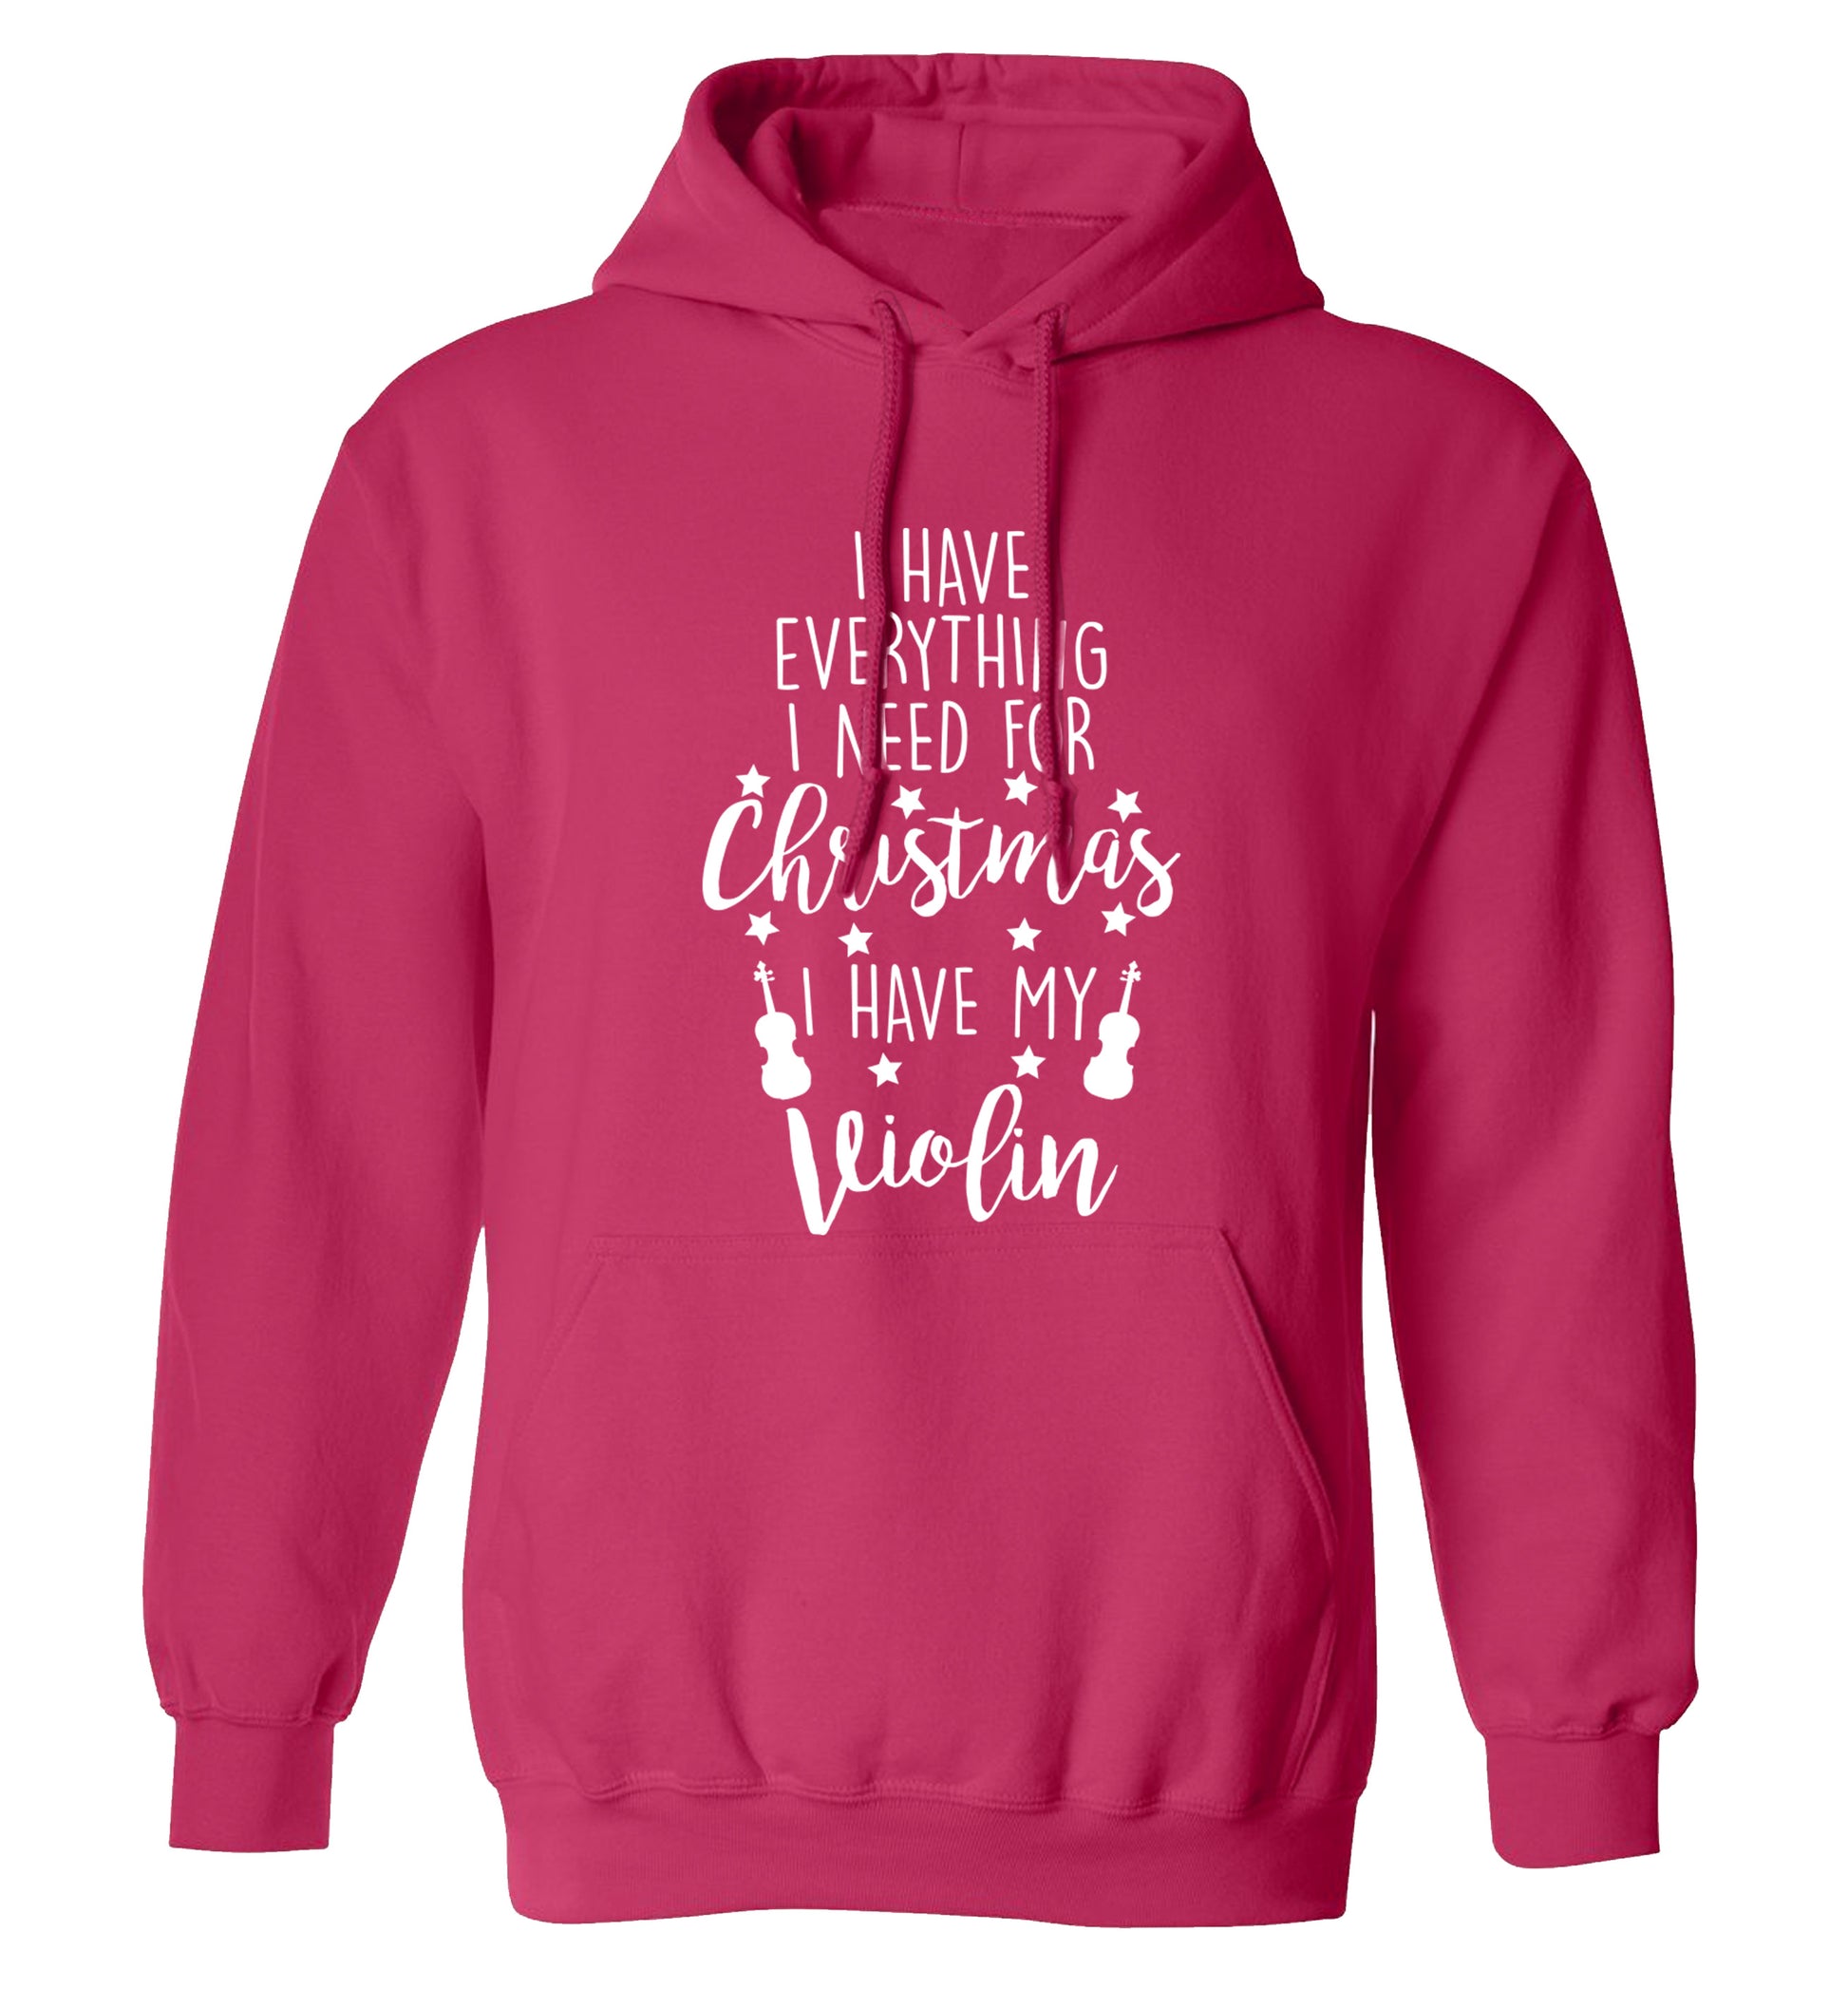 I have everything I need for Christmas I have my violin adults unisex pink hoodie 2XL